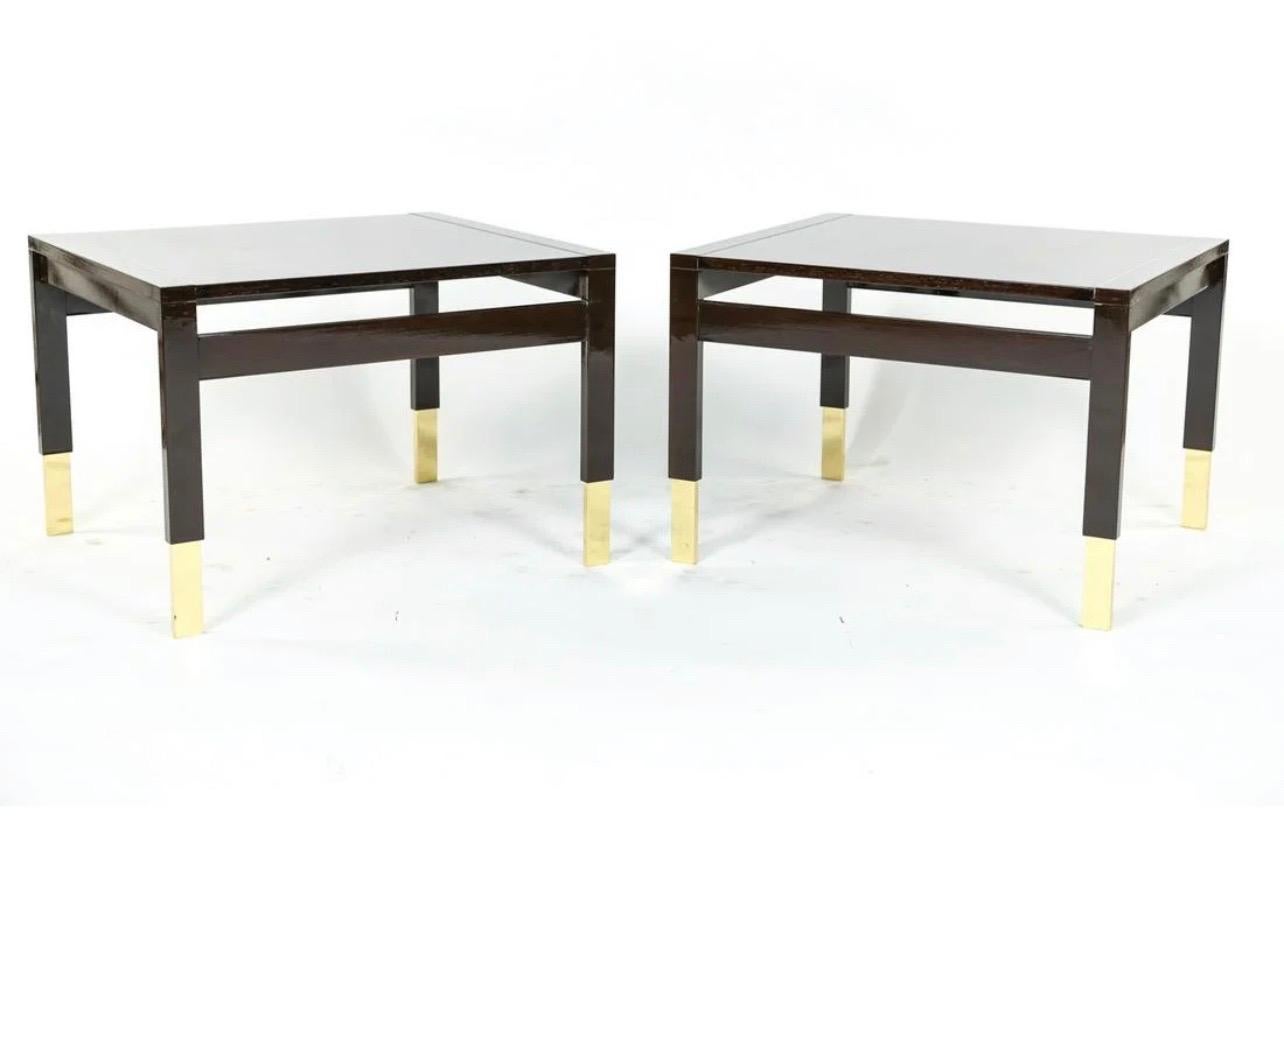 Wonderful pair of Lorin Marsh lacquered Wenge and enameled wood with brass sabots side / end tables.
Lorin Marsh metal label under one table.
Dimensions: 18